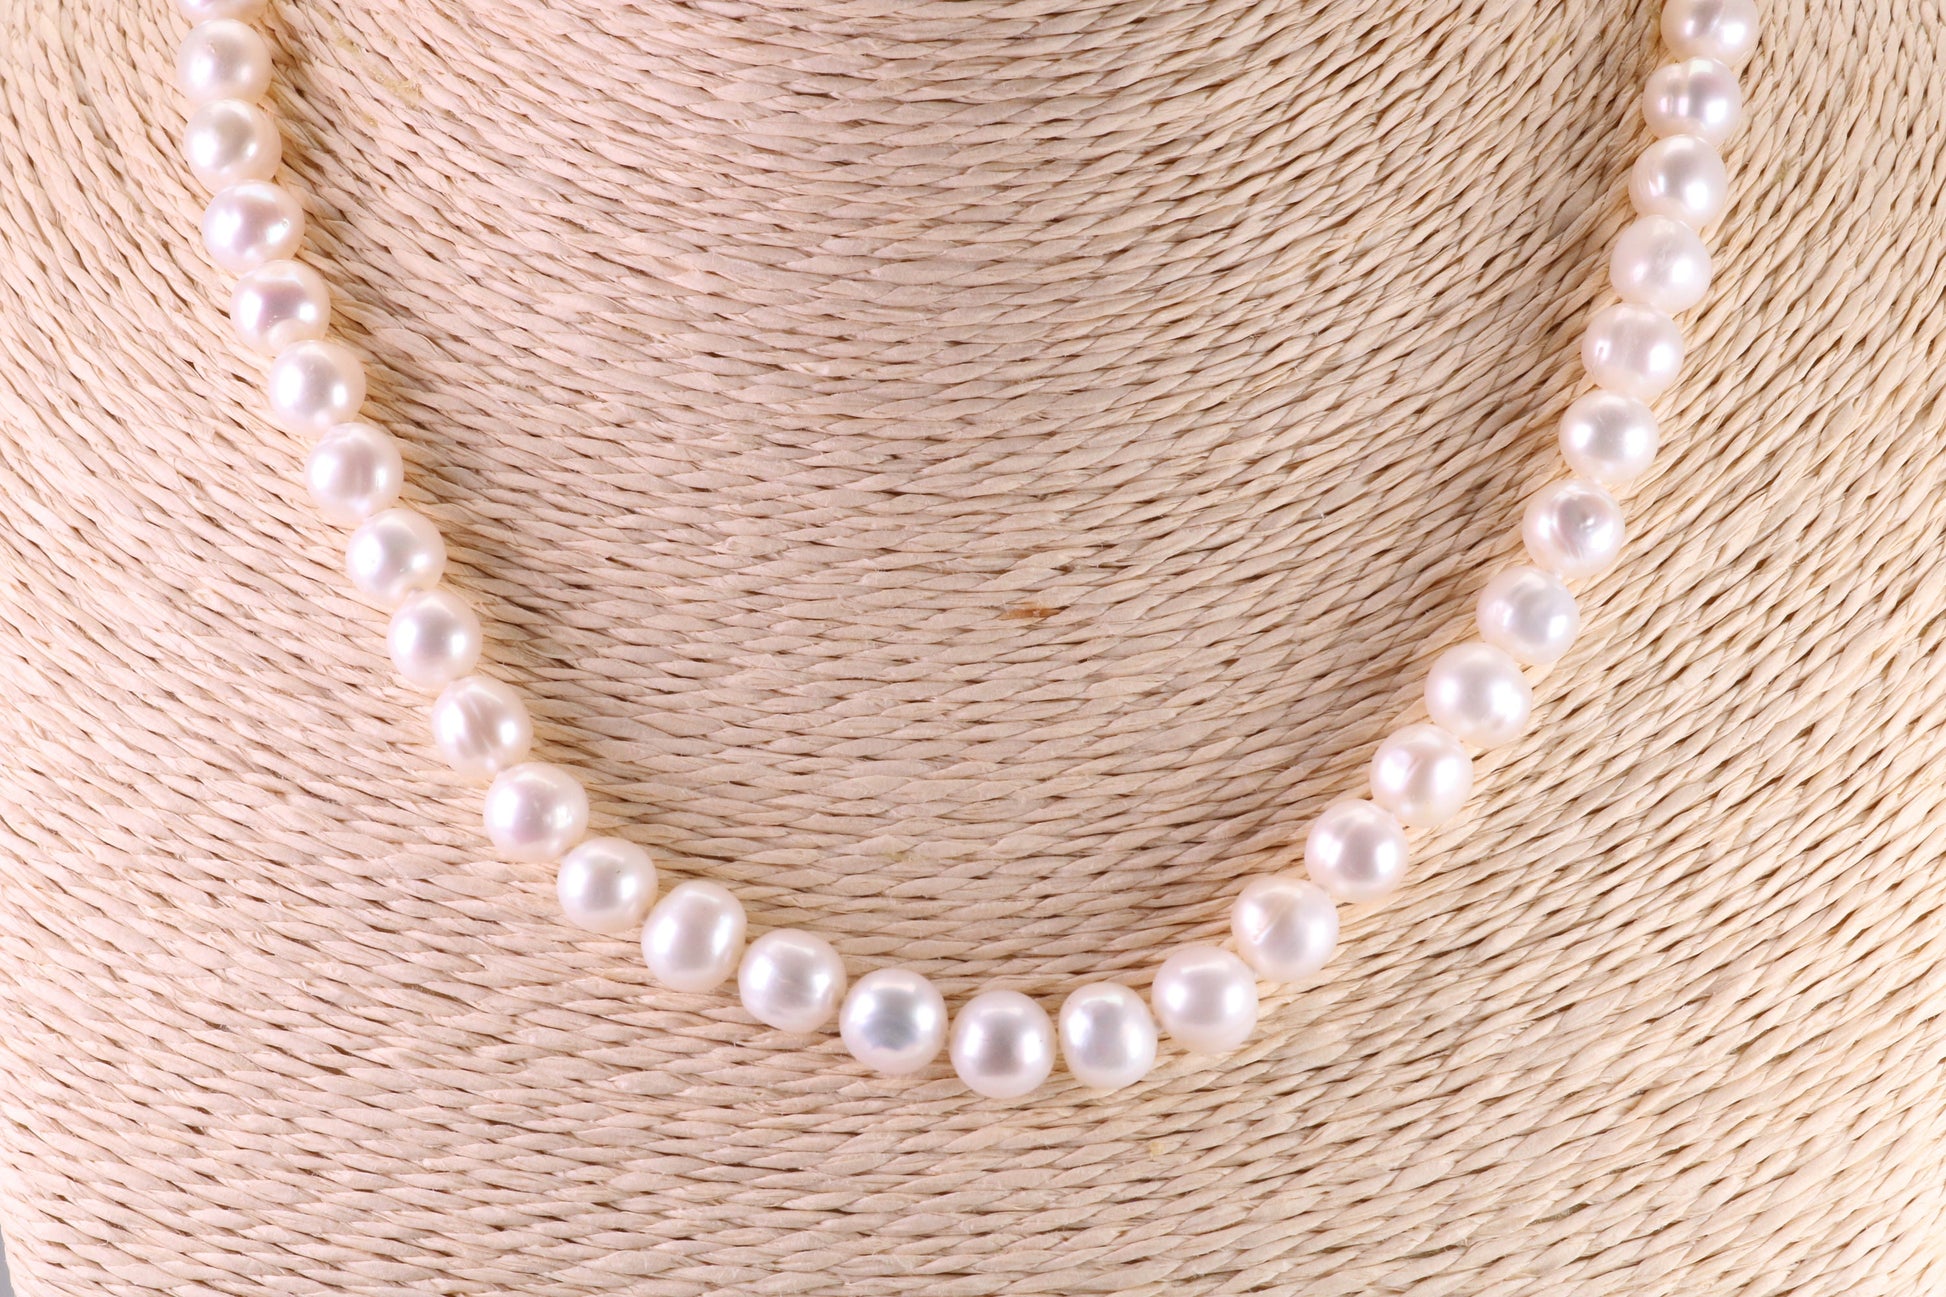 18 Inches Long Single Strand Natural 8 mm Round Pearl Necklace set in Silver